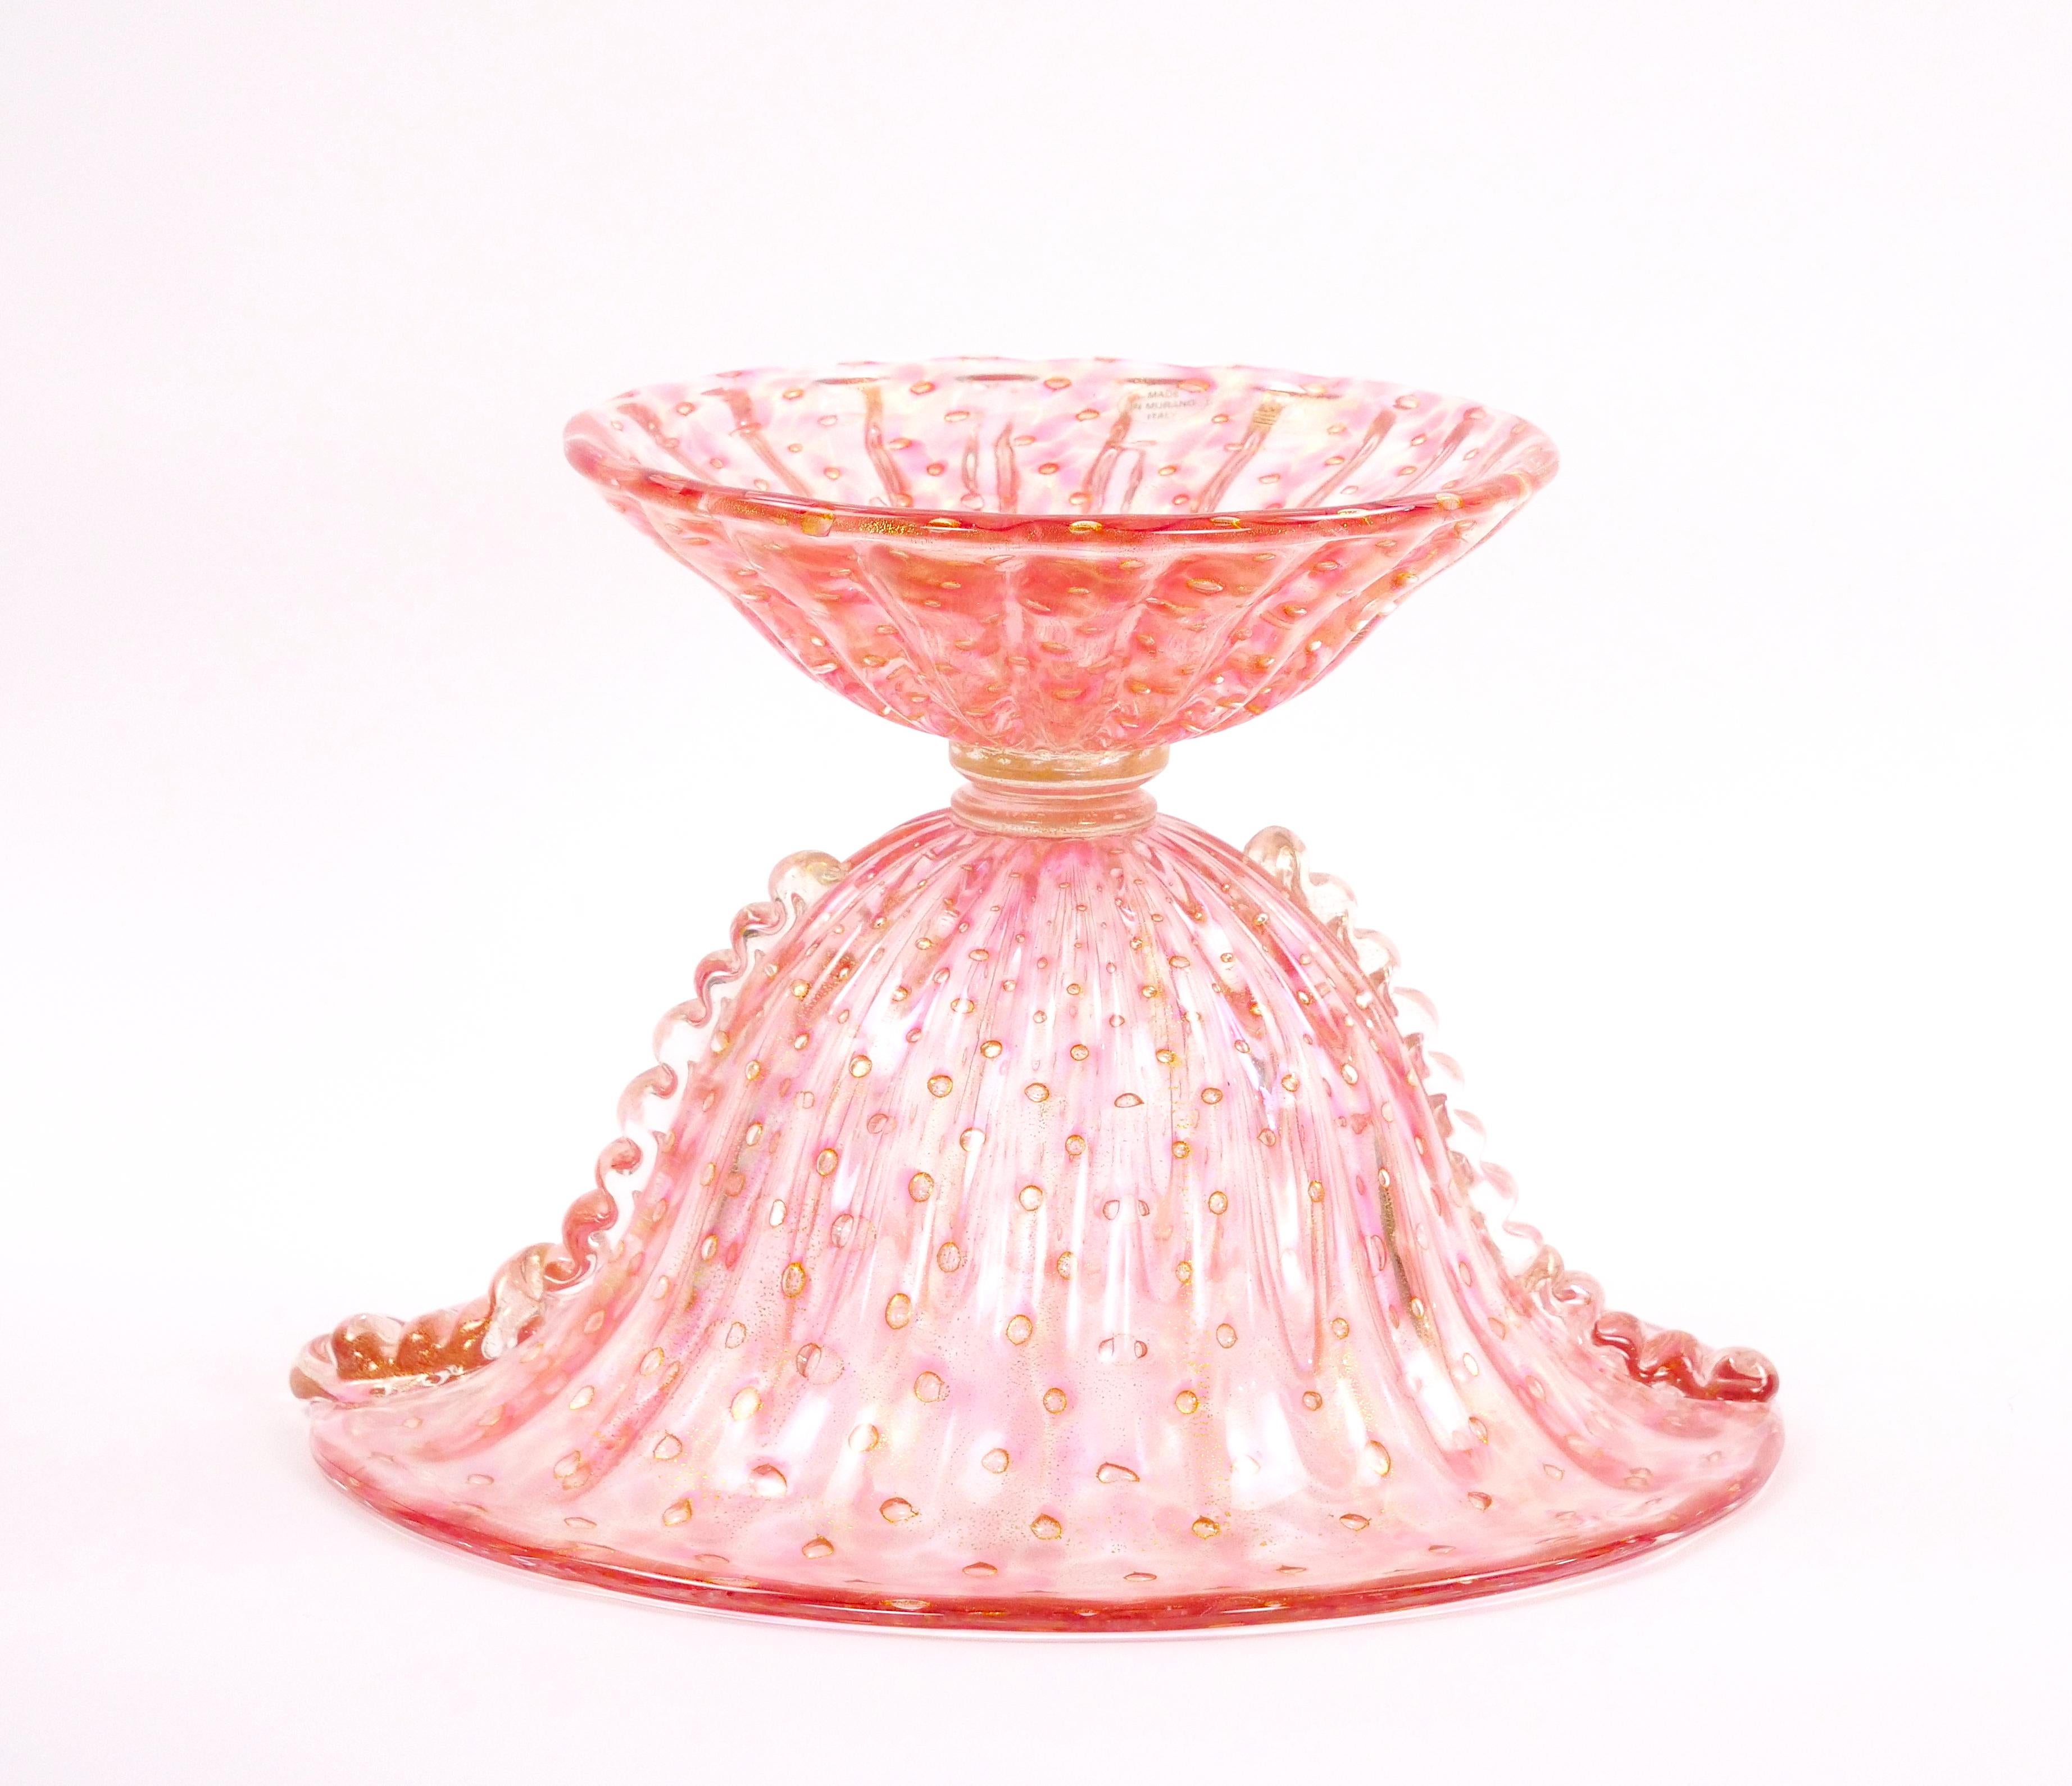 Murano Bullicante / Gold Infused Rose Colored Glass Tableware Centerpiece Bowl For Sale 4